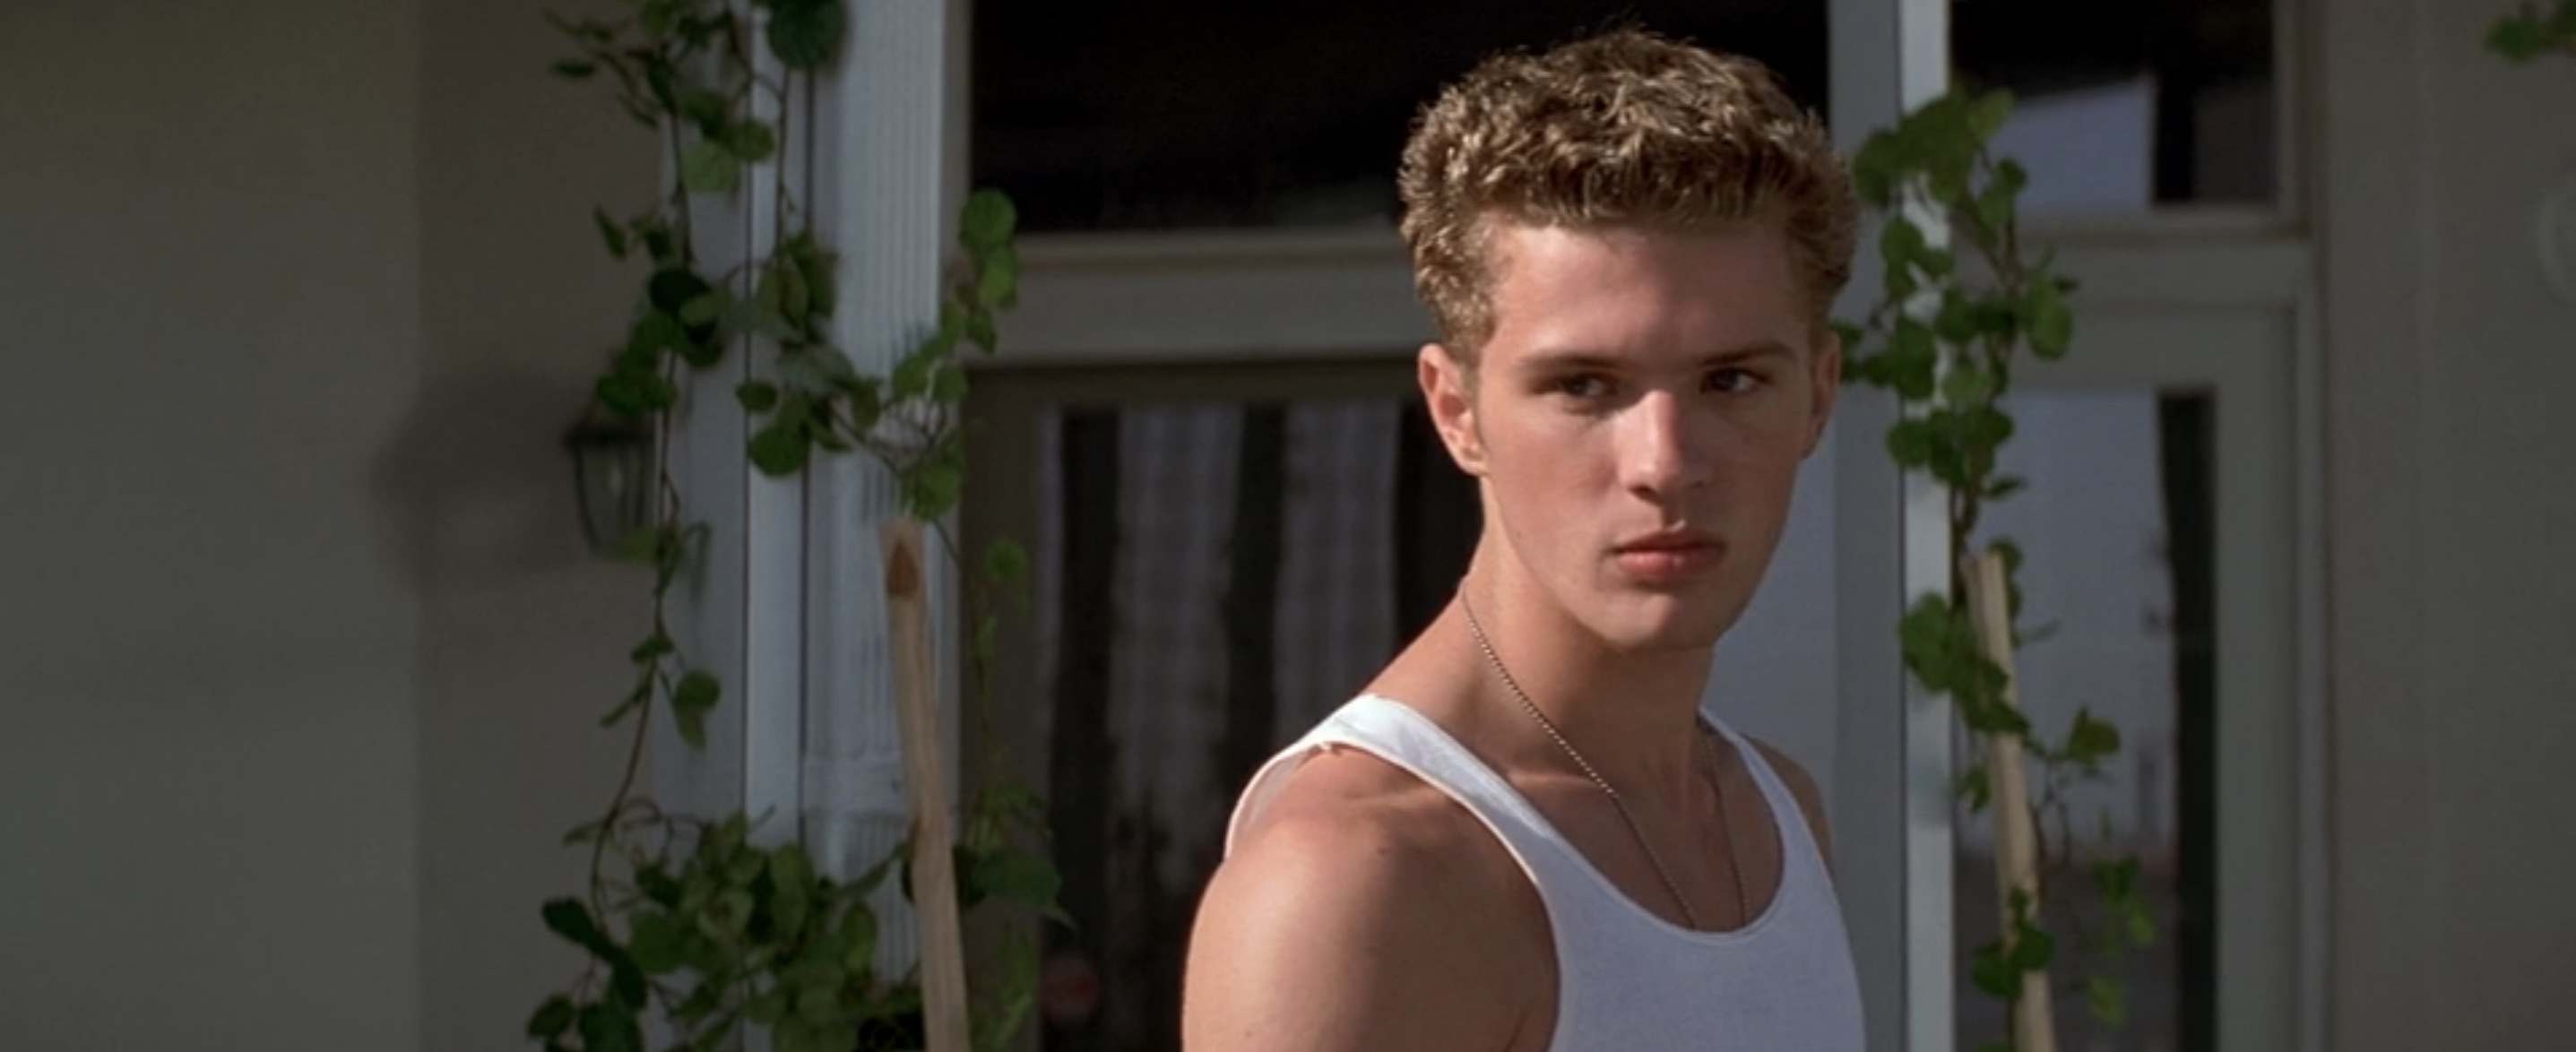 I Know What You Did Last Summer Cast - Ryan Phillippe as Barry Cox